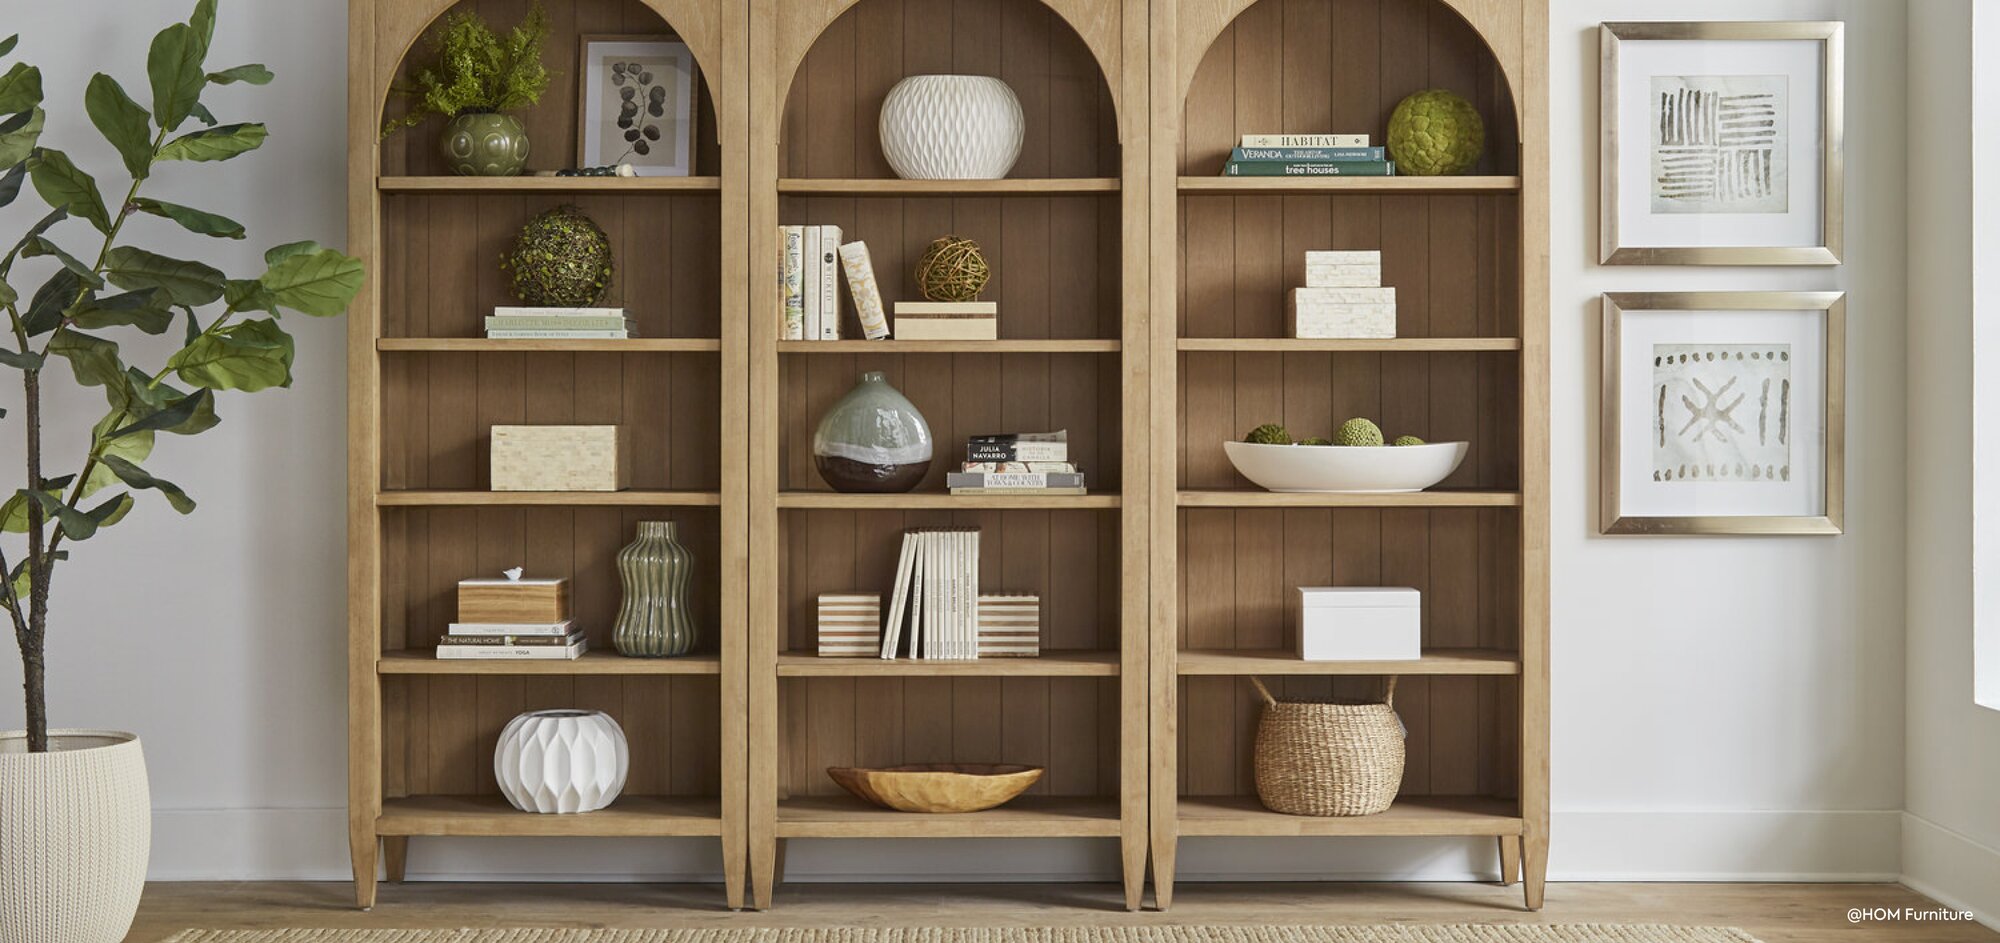 5 Storage Tips to Organize Your Home